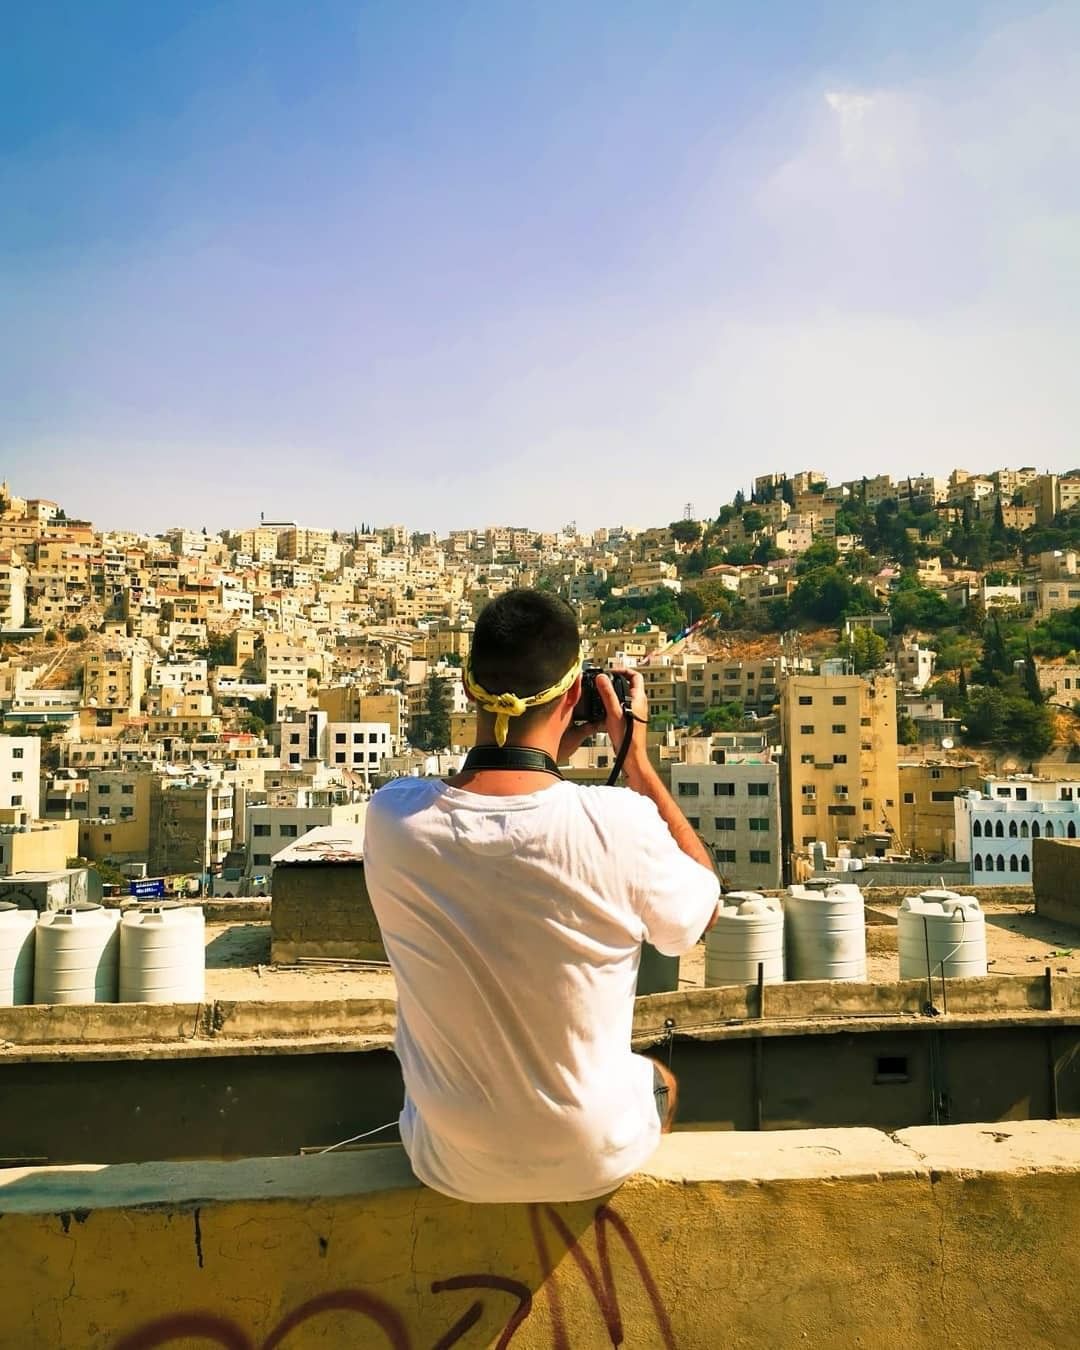 1. Snap the best shot in #Jordan⁠ 2. Upload it to your Instagram⁠ 3. Tag us, or use the hashtags #VisitJordan #ShareYourJordan ⁠ for a chance to be featured! 📸😃⁠ #Amman Photo Credit @mdecoster66